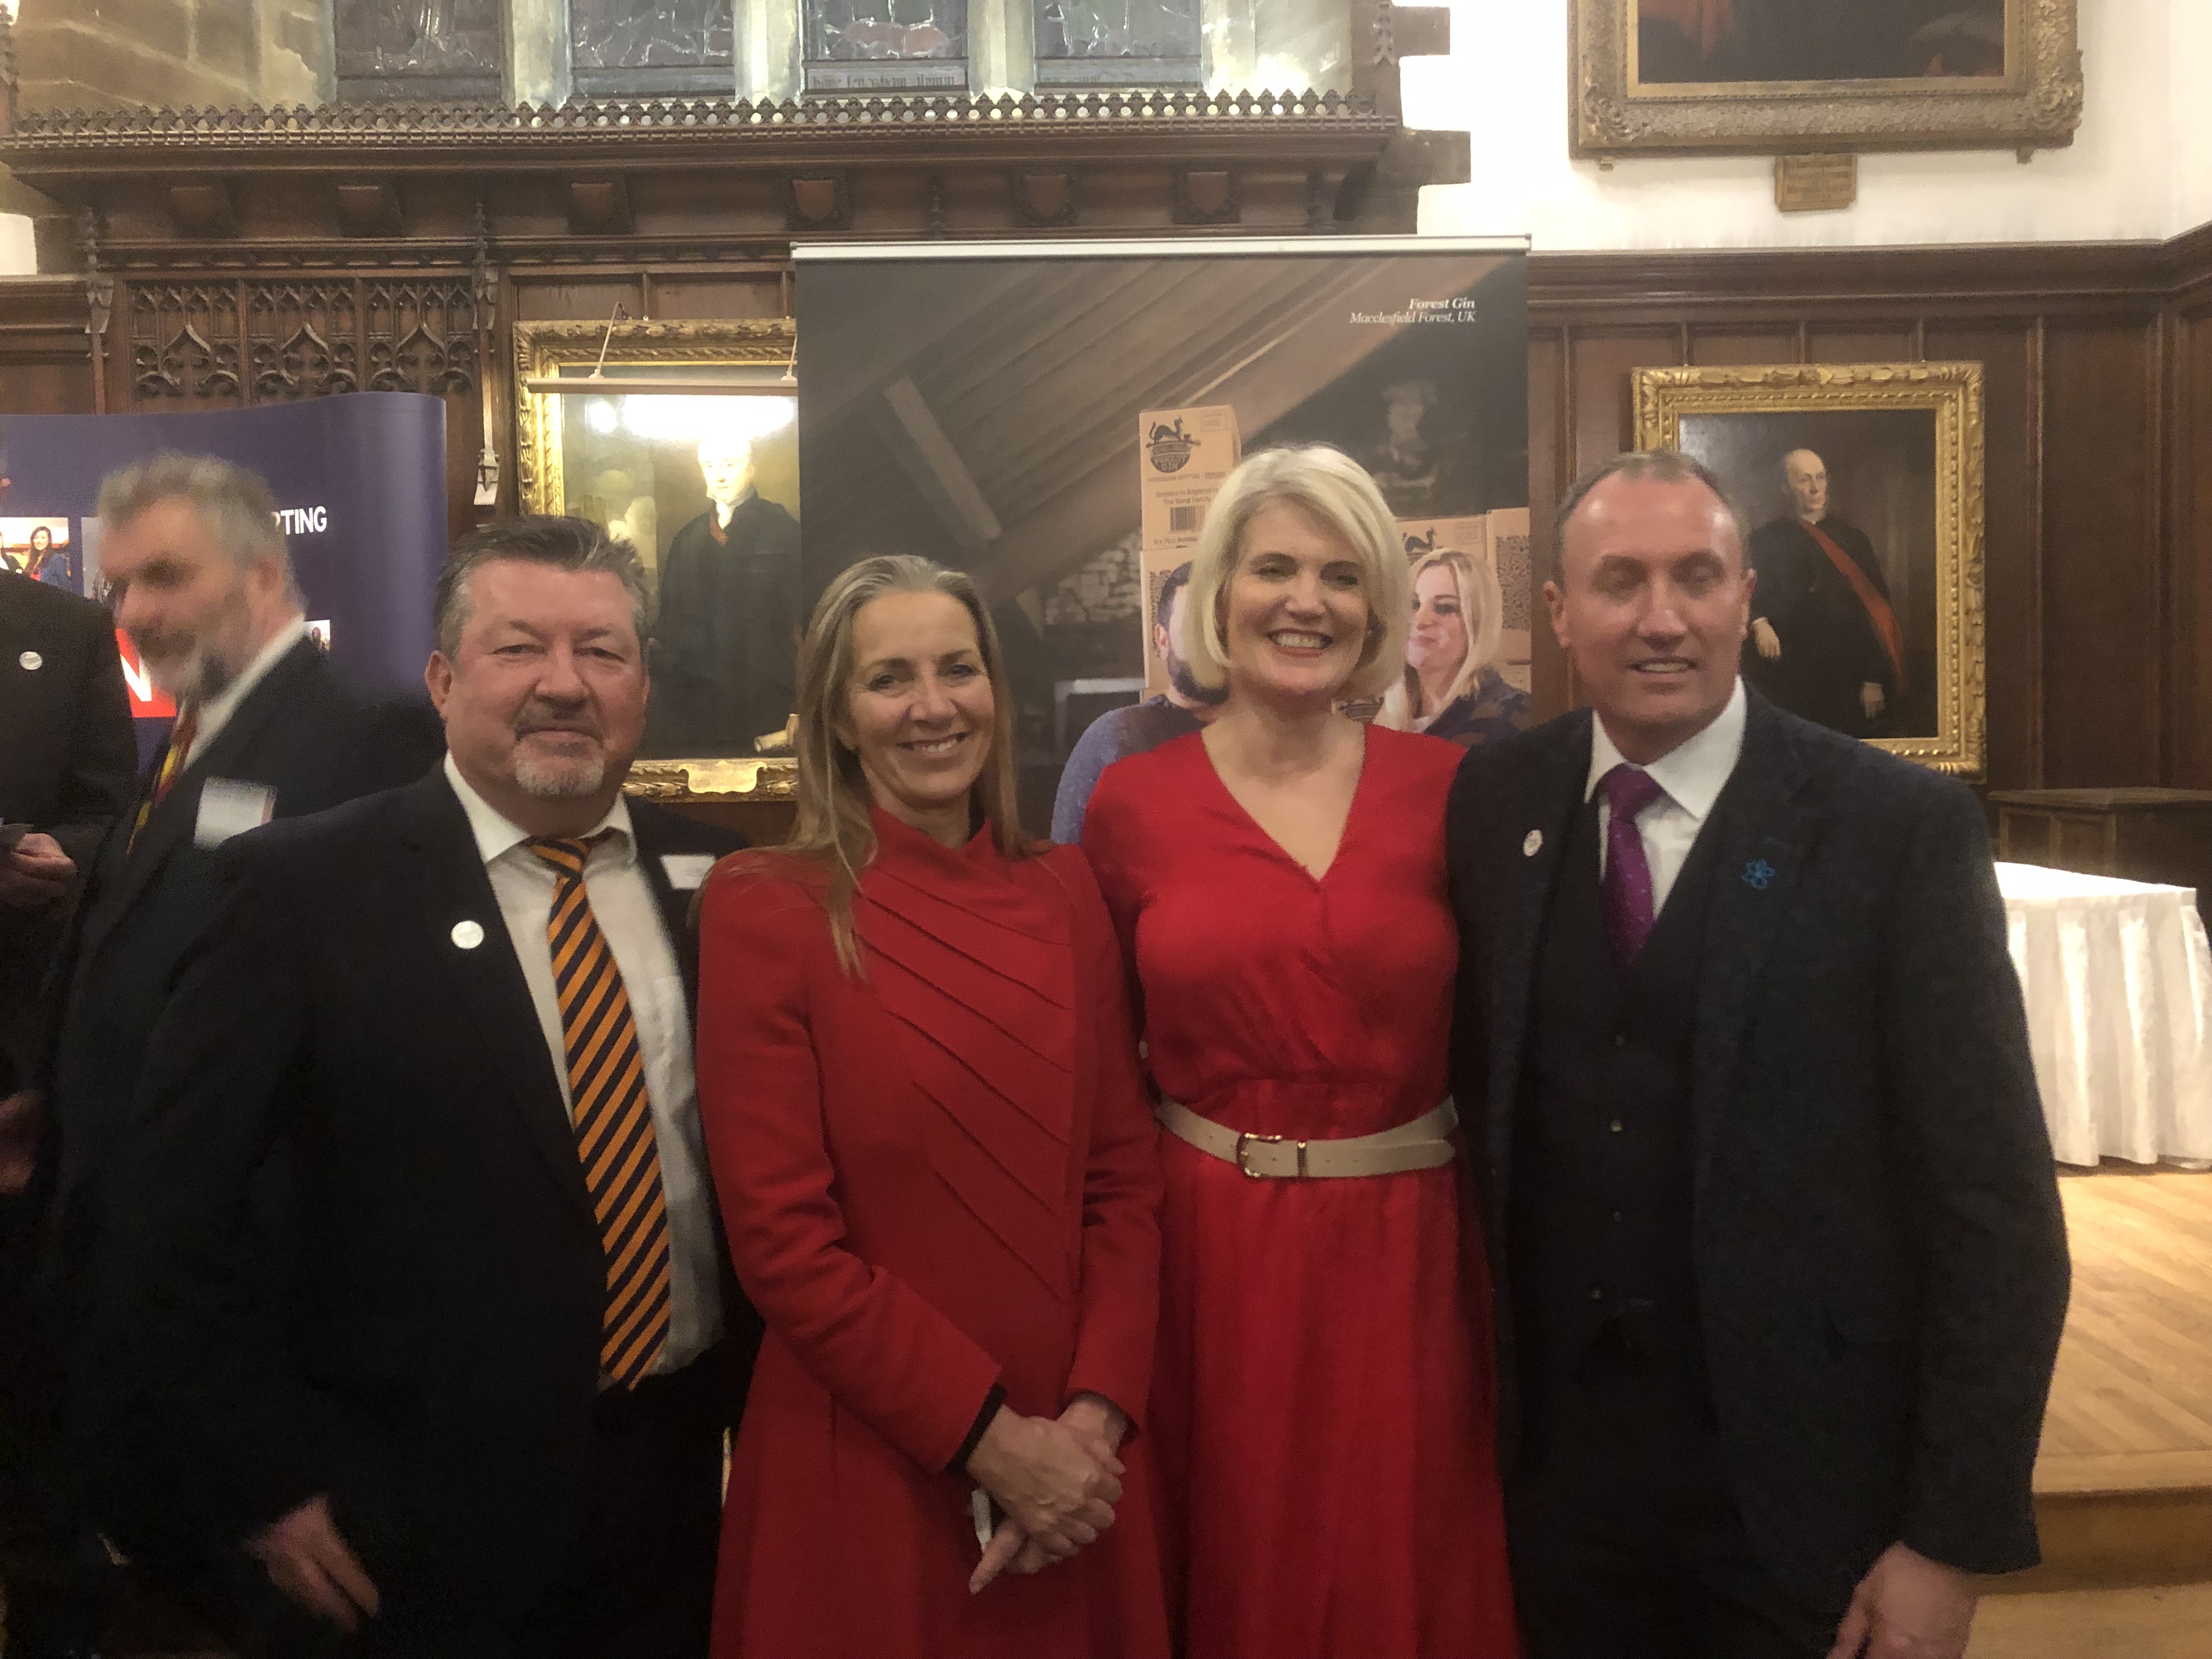 Left to right: Colin Simpson, business development director at Tomlinson Hall, Rona Fairhead, Baroness Fairhead CBE, Minister of State at the Department for International Trade, Claire Preston, CEO at Sound Training Manger and Bill Scott MBE, CEO at Wilton Engineering.